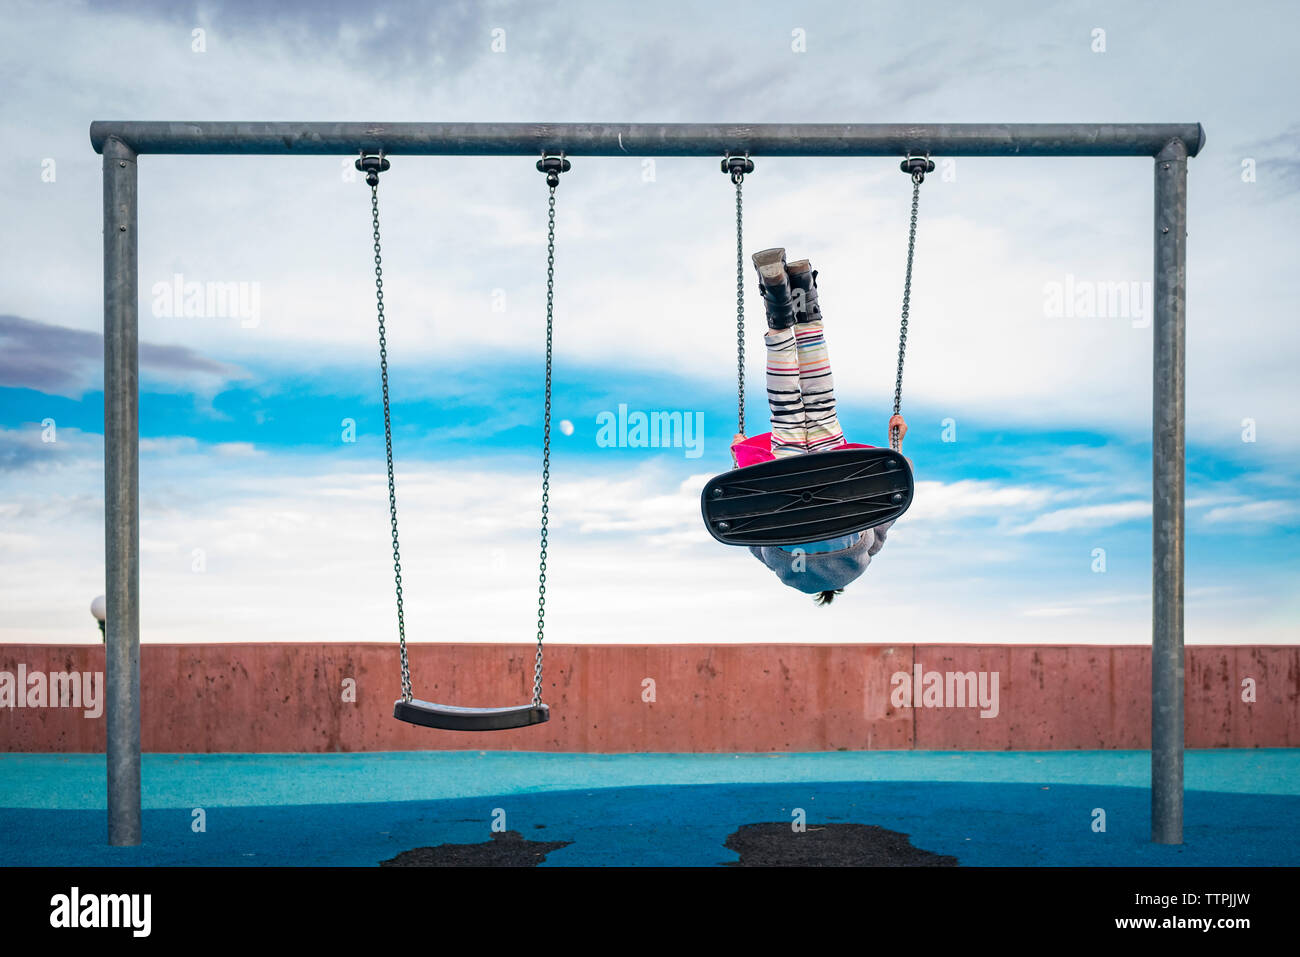 Playful girl swinging against cloudy sky at playground Stock Photo